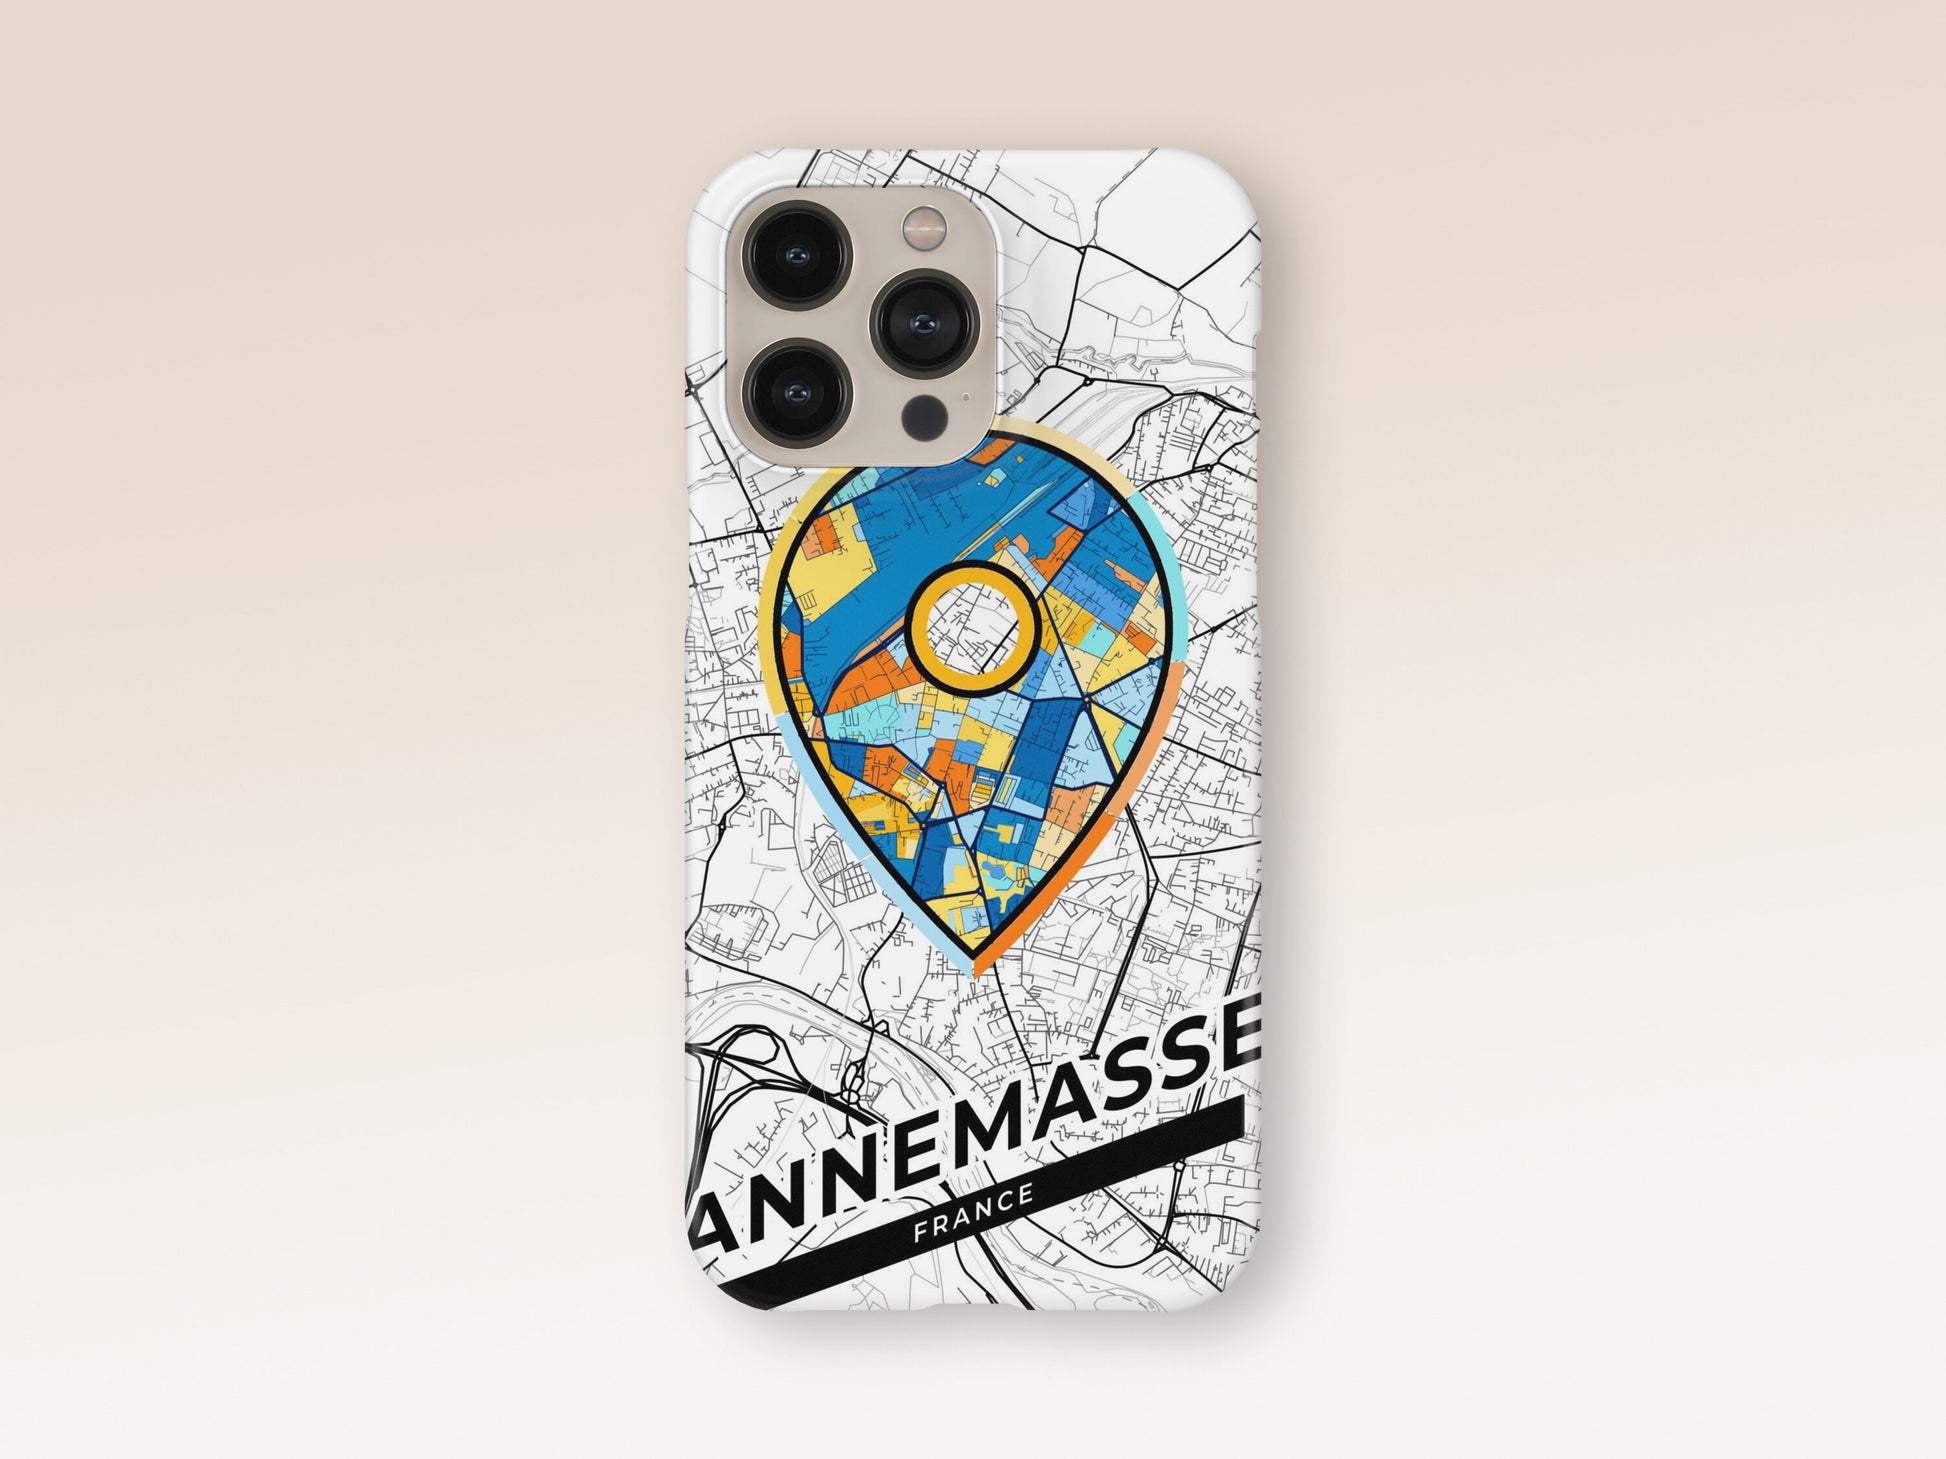 Annemasse France slim phone case with colorful icon. Birthday, wedding or housewarming gift. Couple match cases. 1